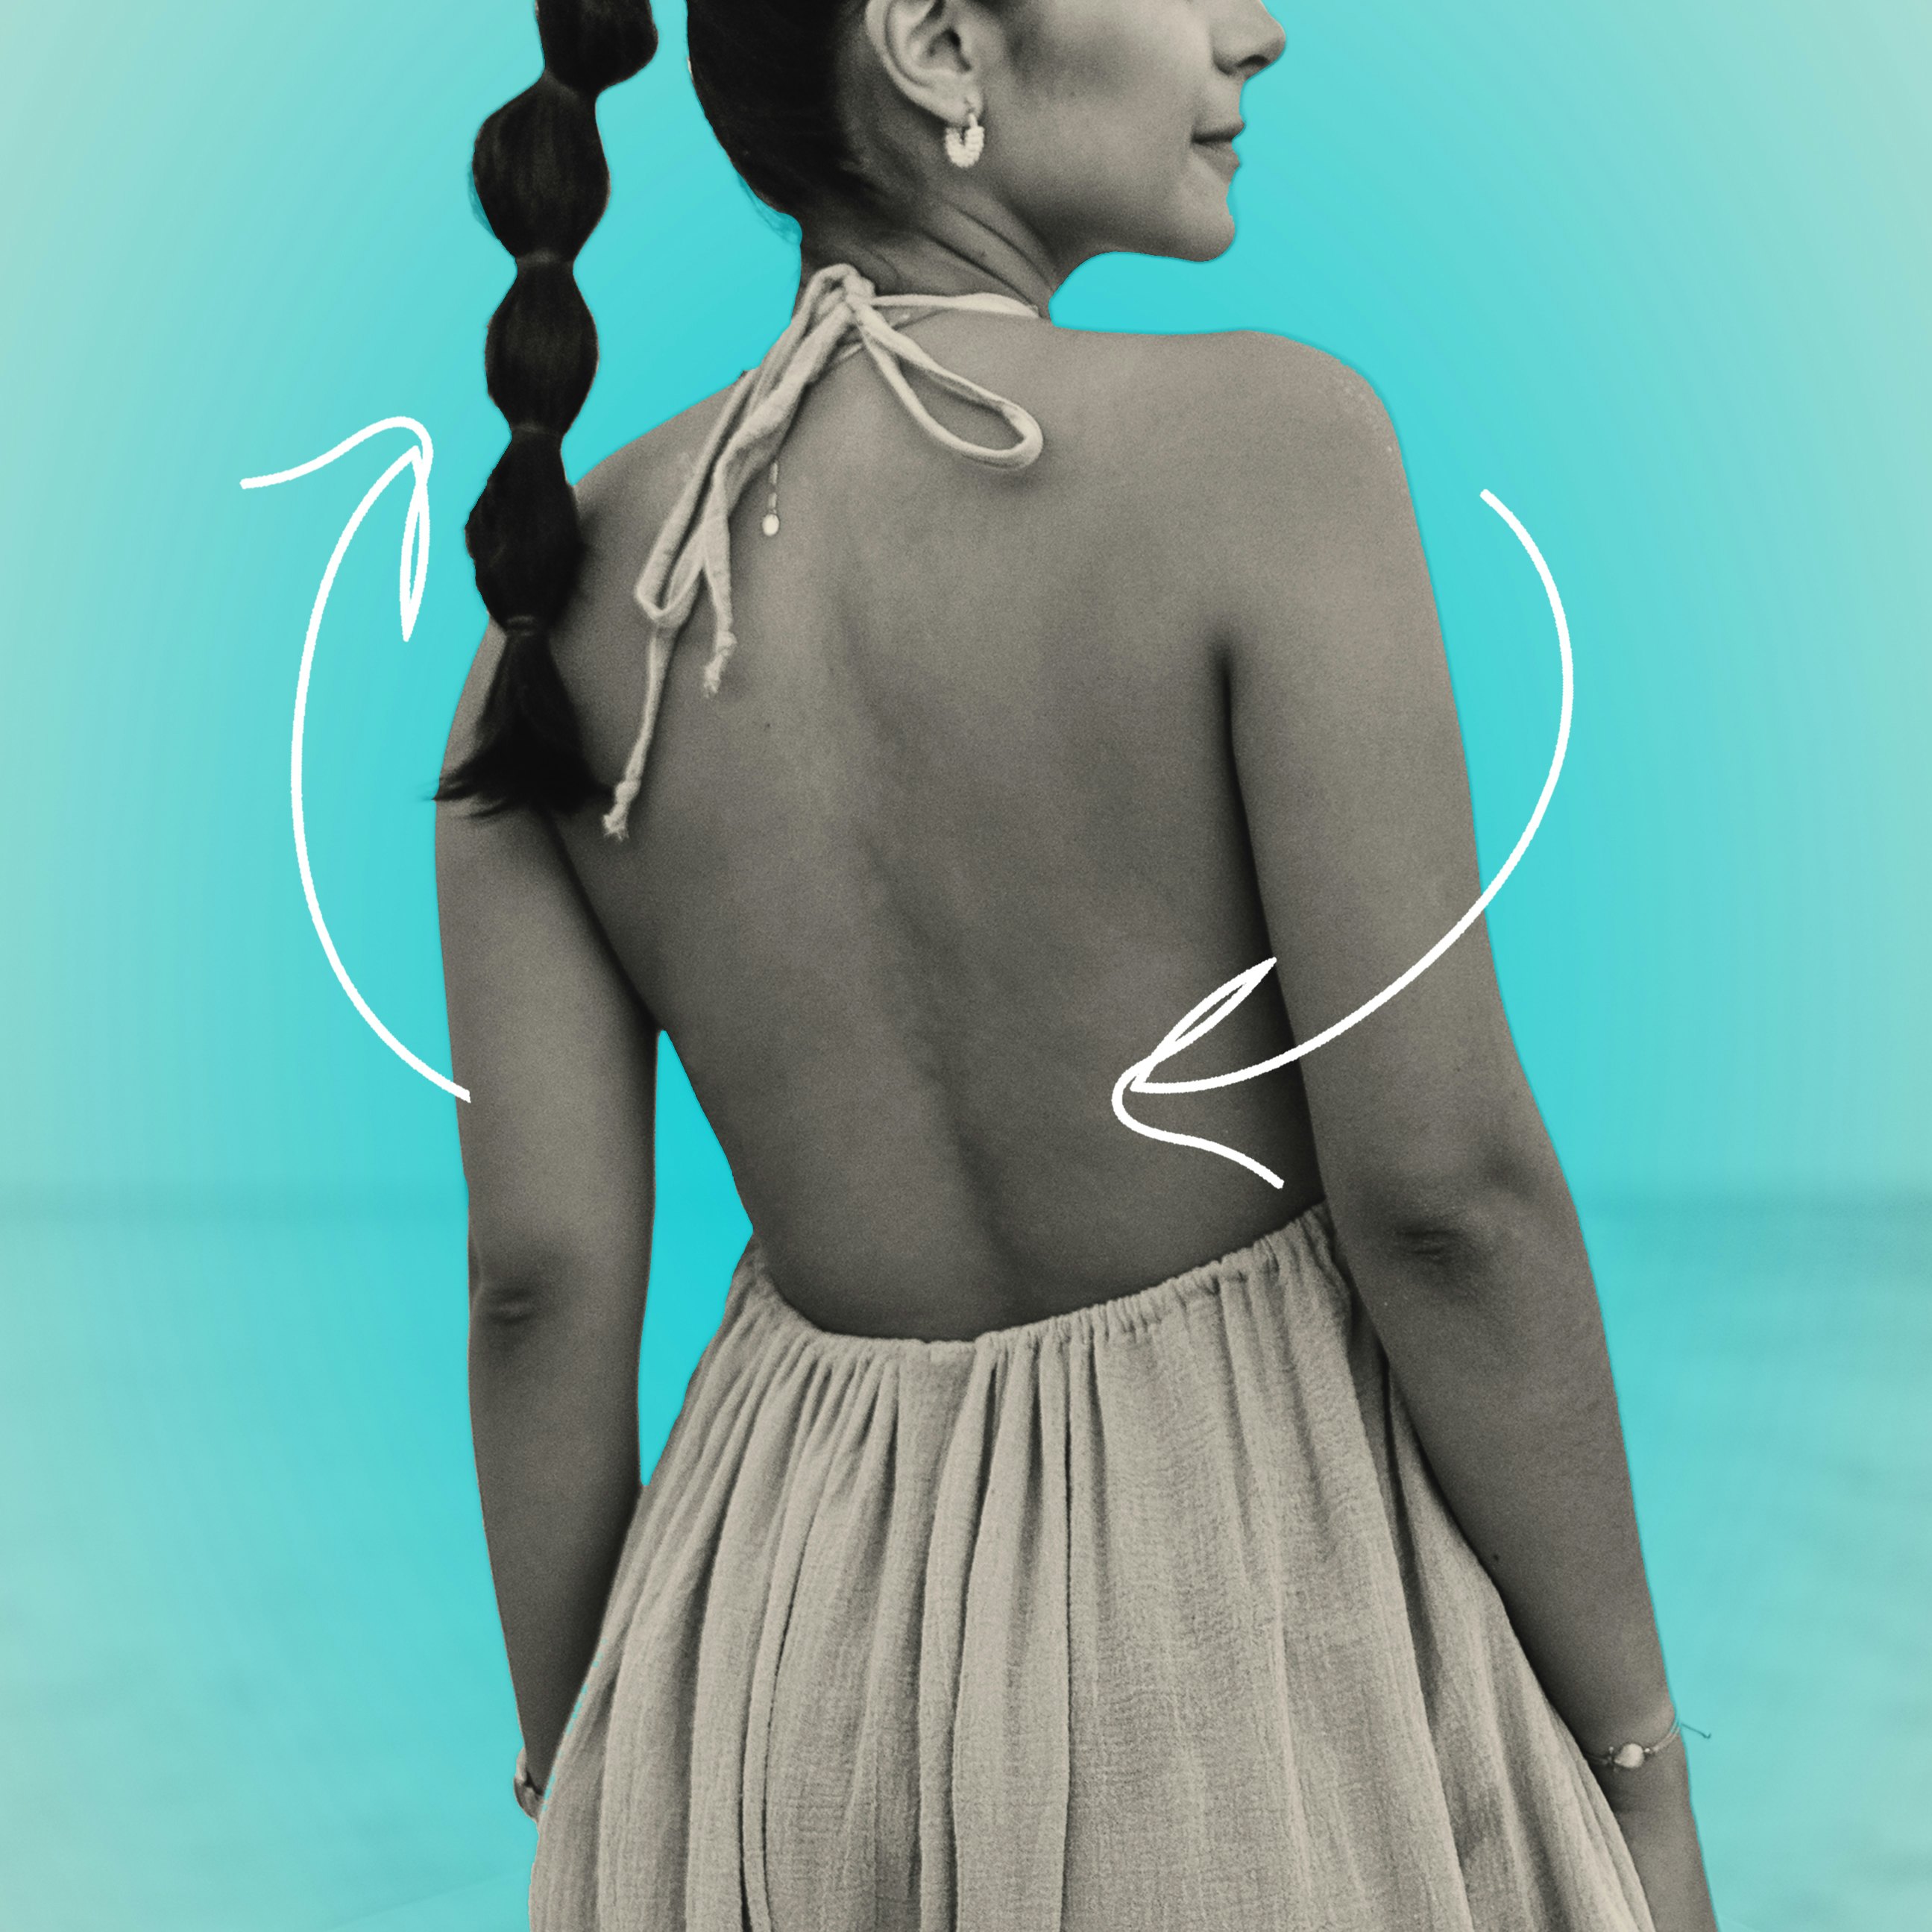 Turn an old bra into a solution for backless dress problems!